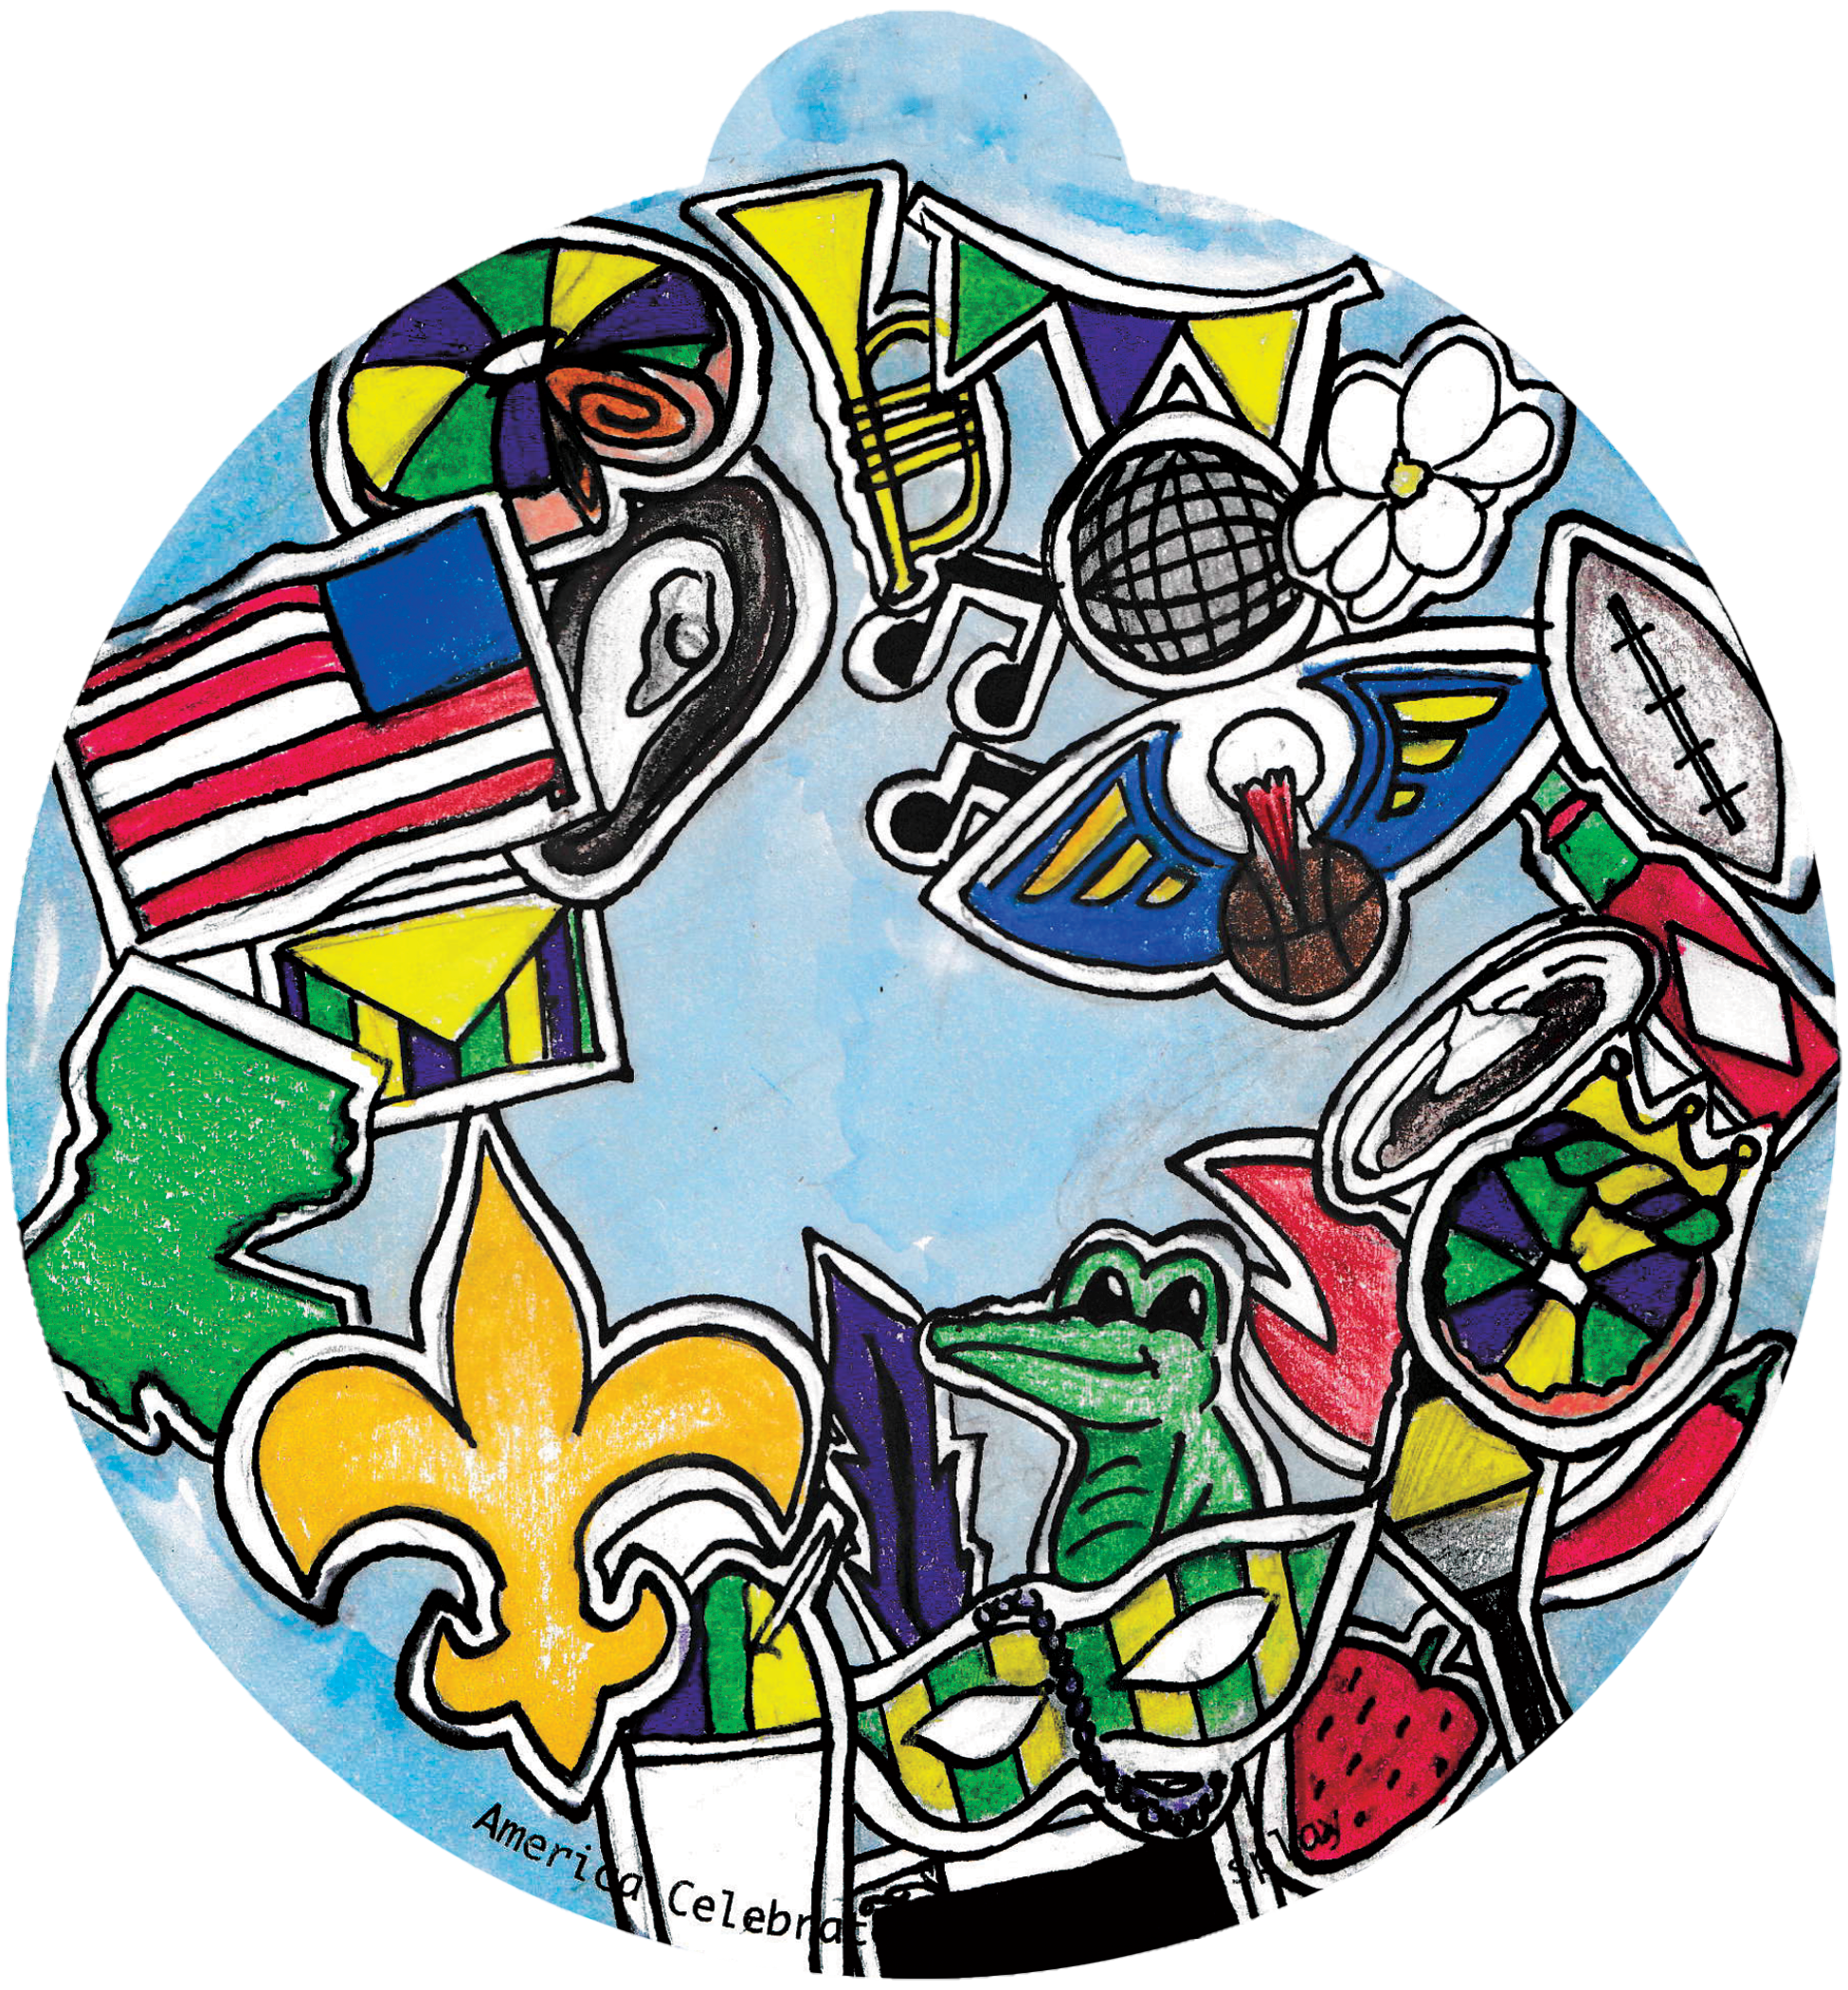 ornament depicting many various symbols of Louisiana, including an alligator, a fleur de lis, a king cake, music notes, and a football